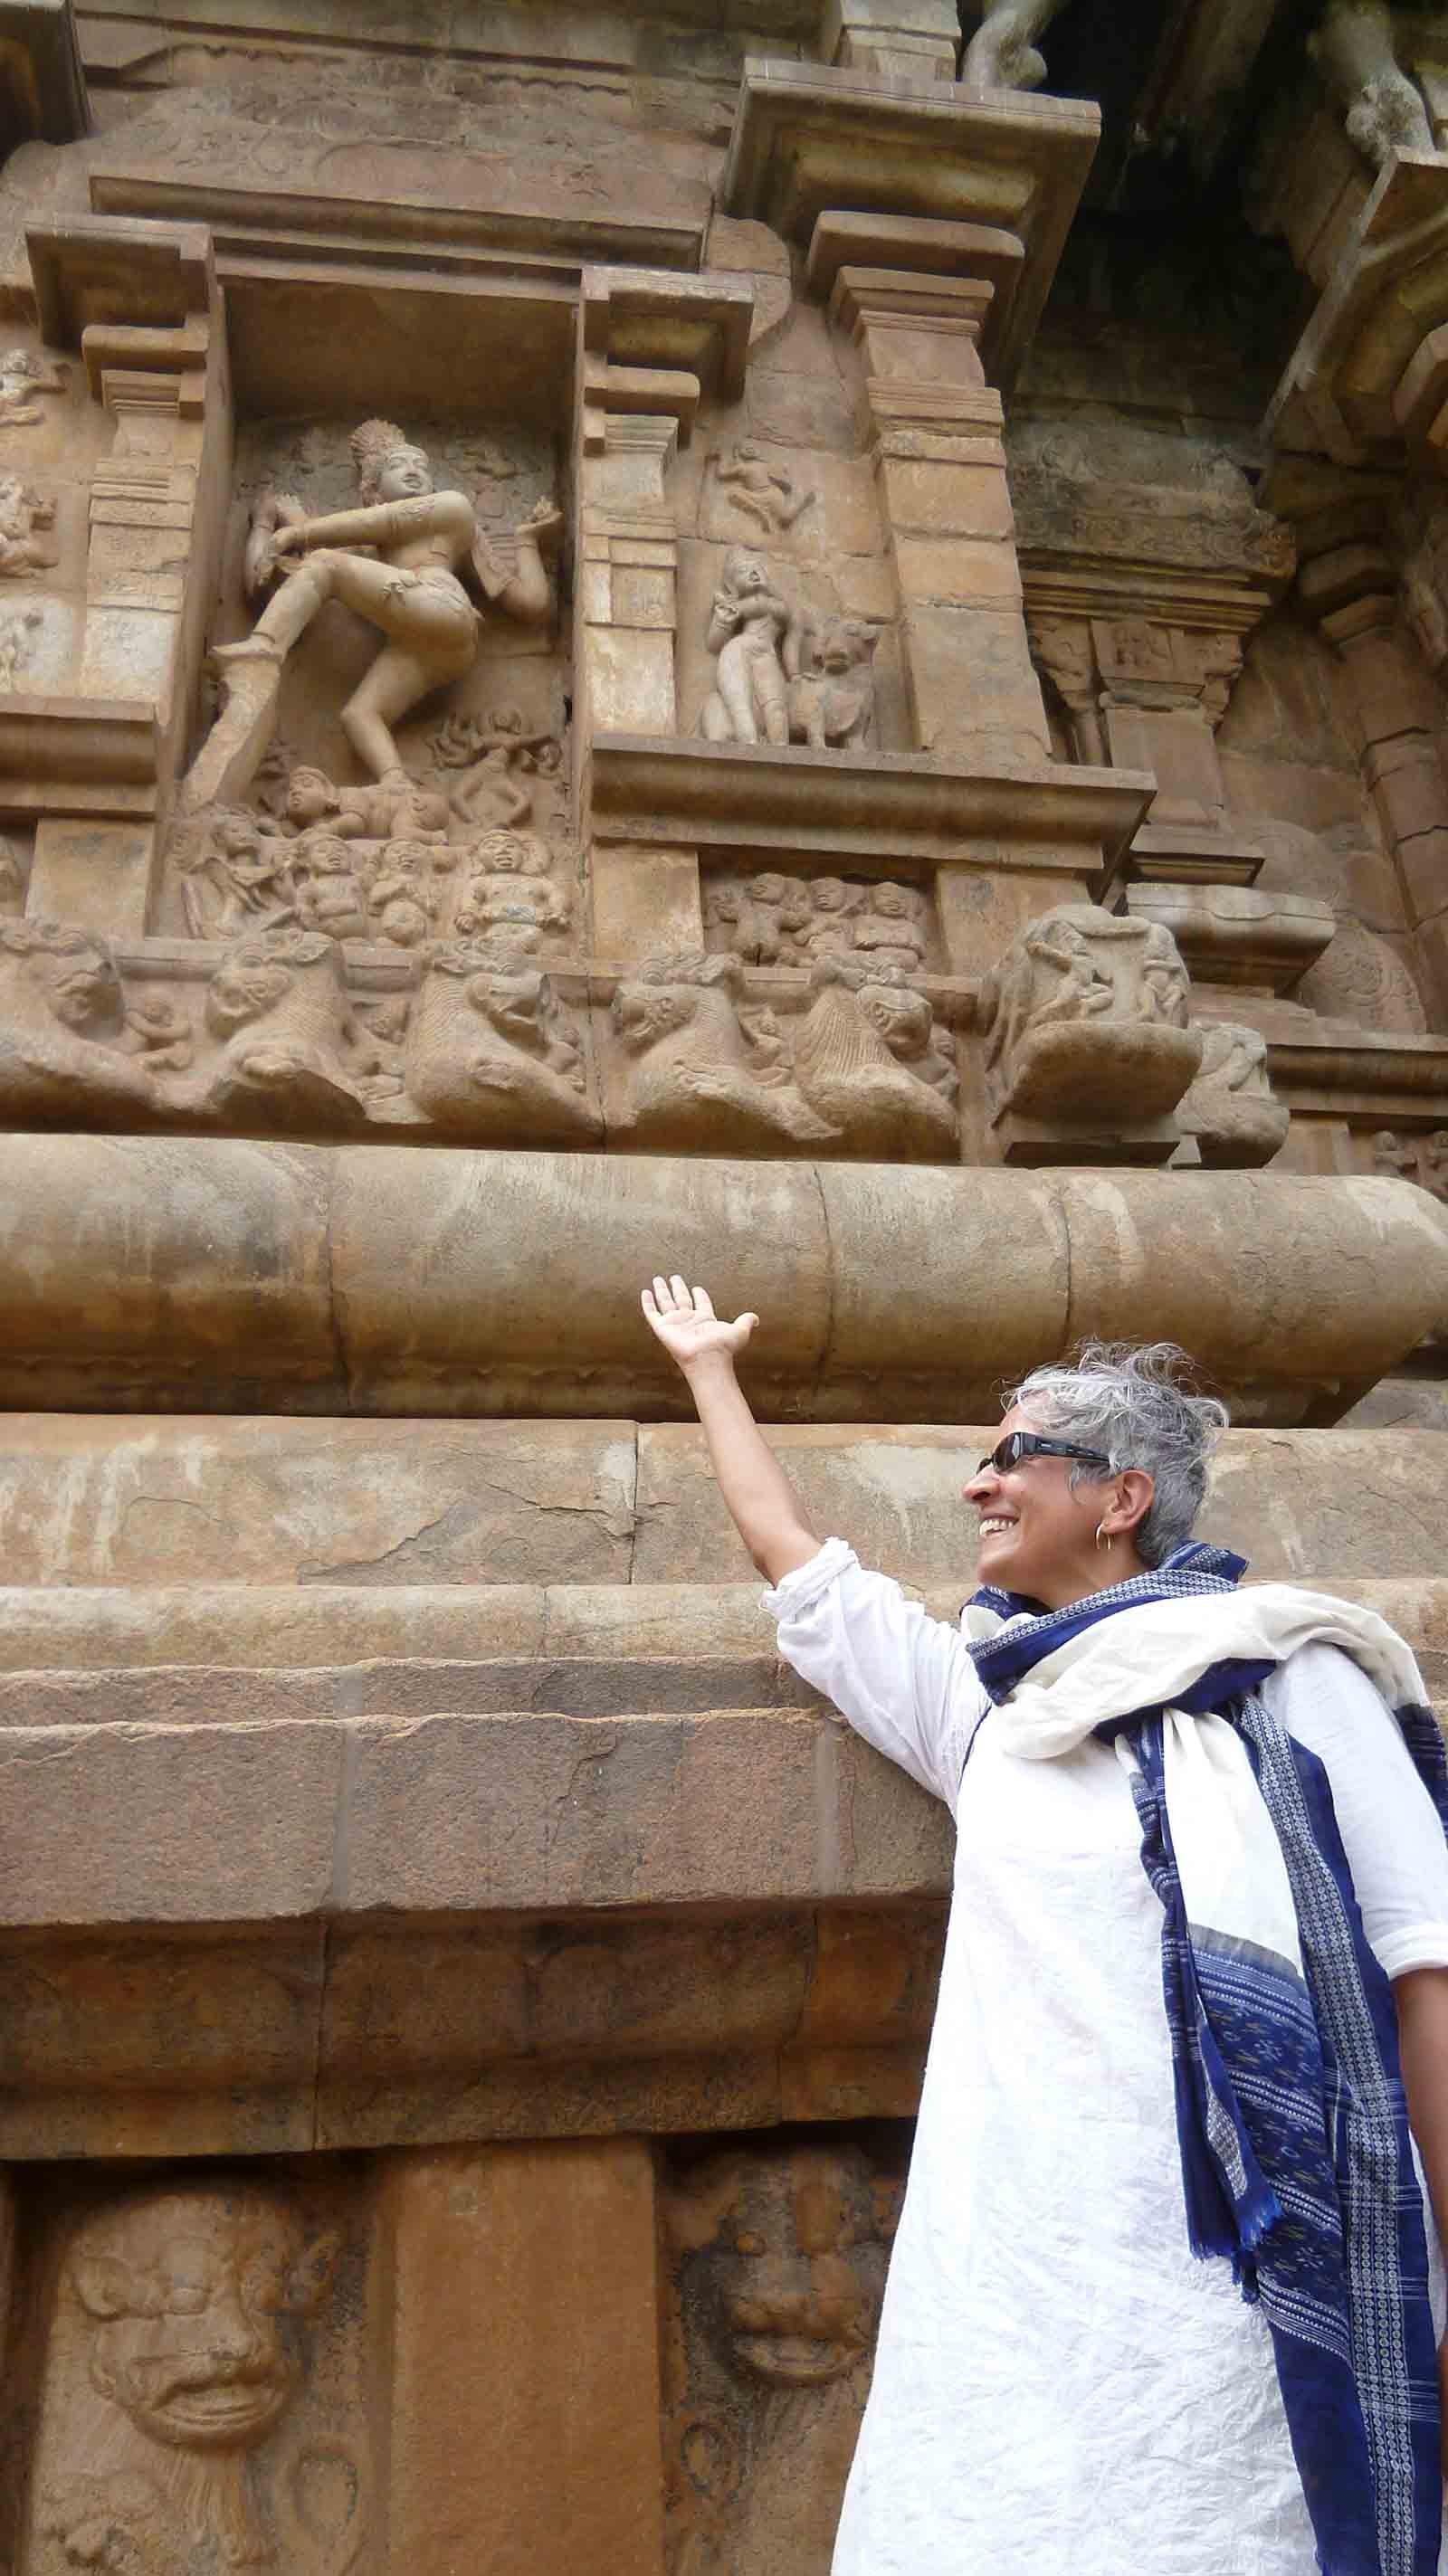  Professor Padma Kaimal gestures to a sculpted feature